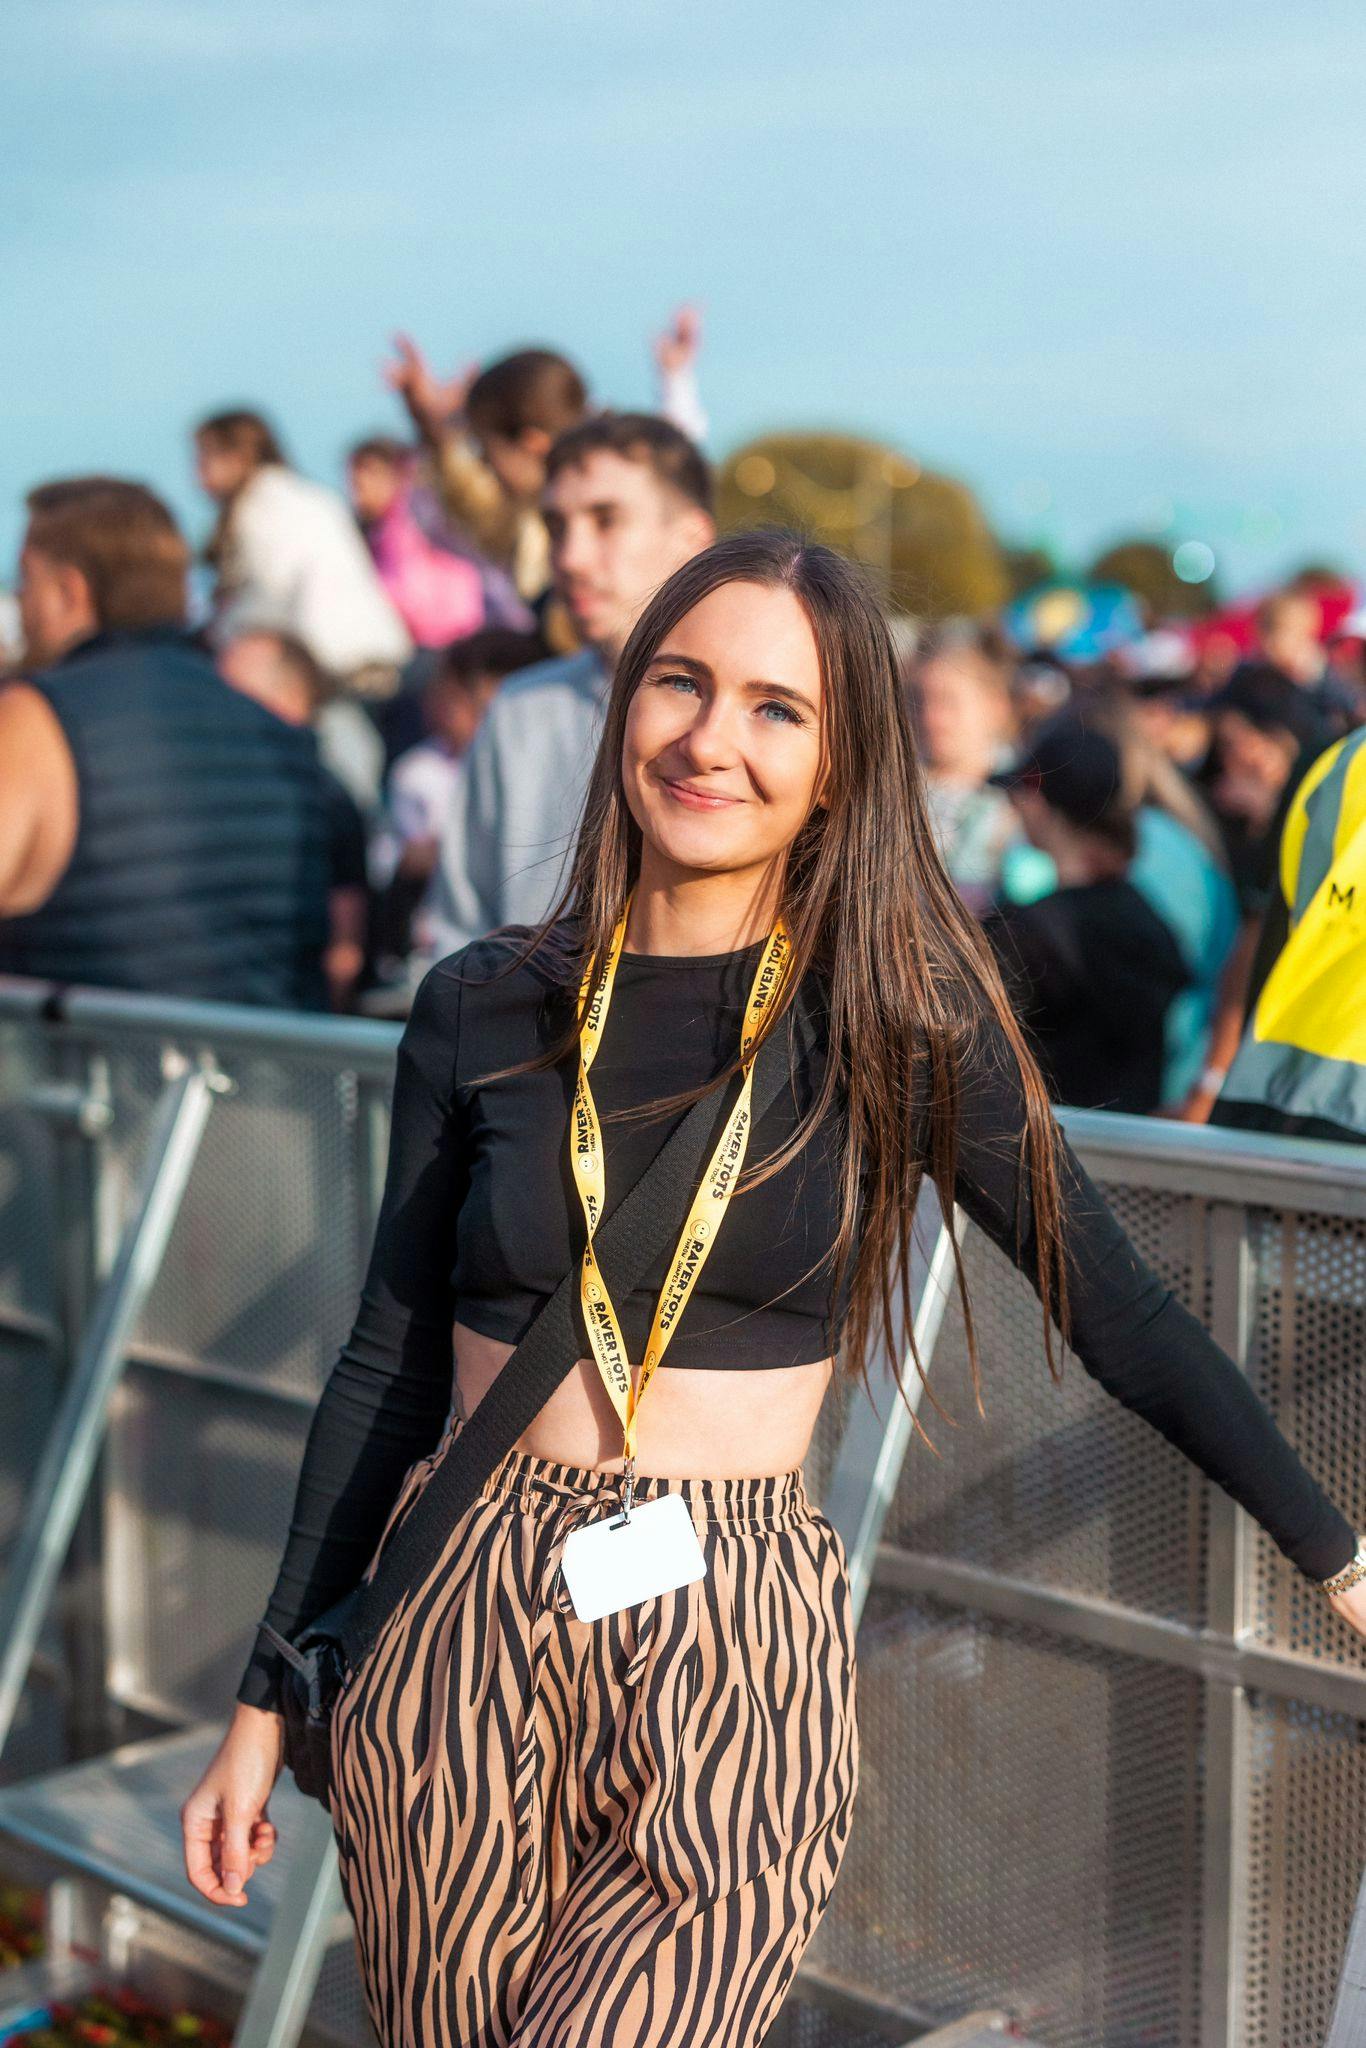 Raver Tots Director Saoirse Holland Talks About Girl Power in the Industry